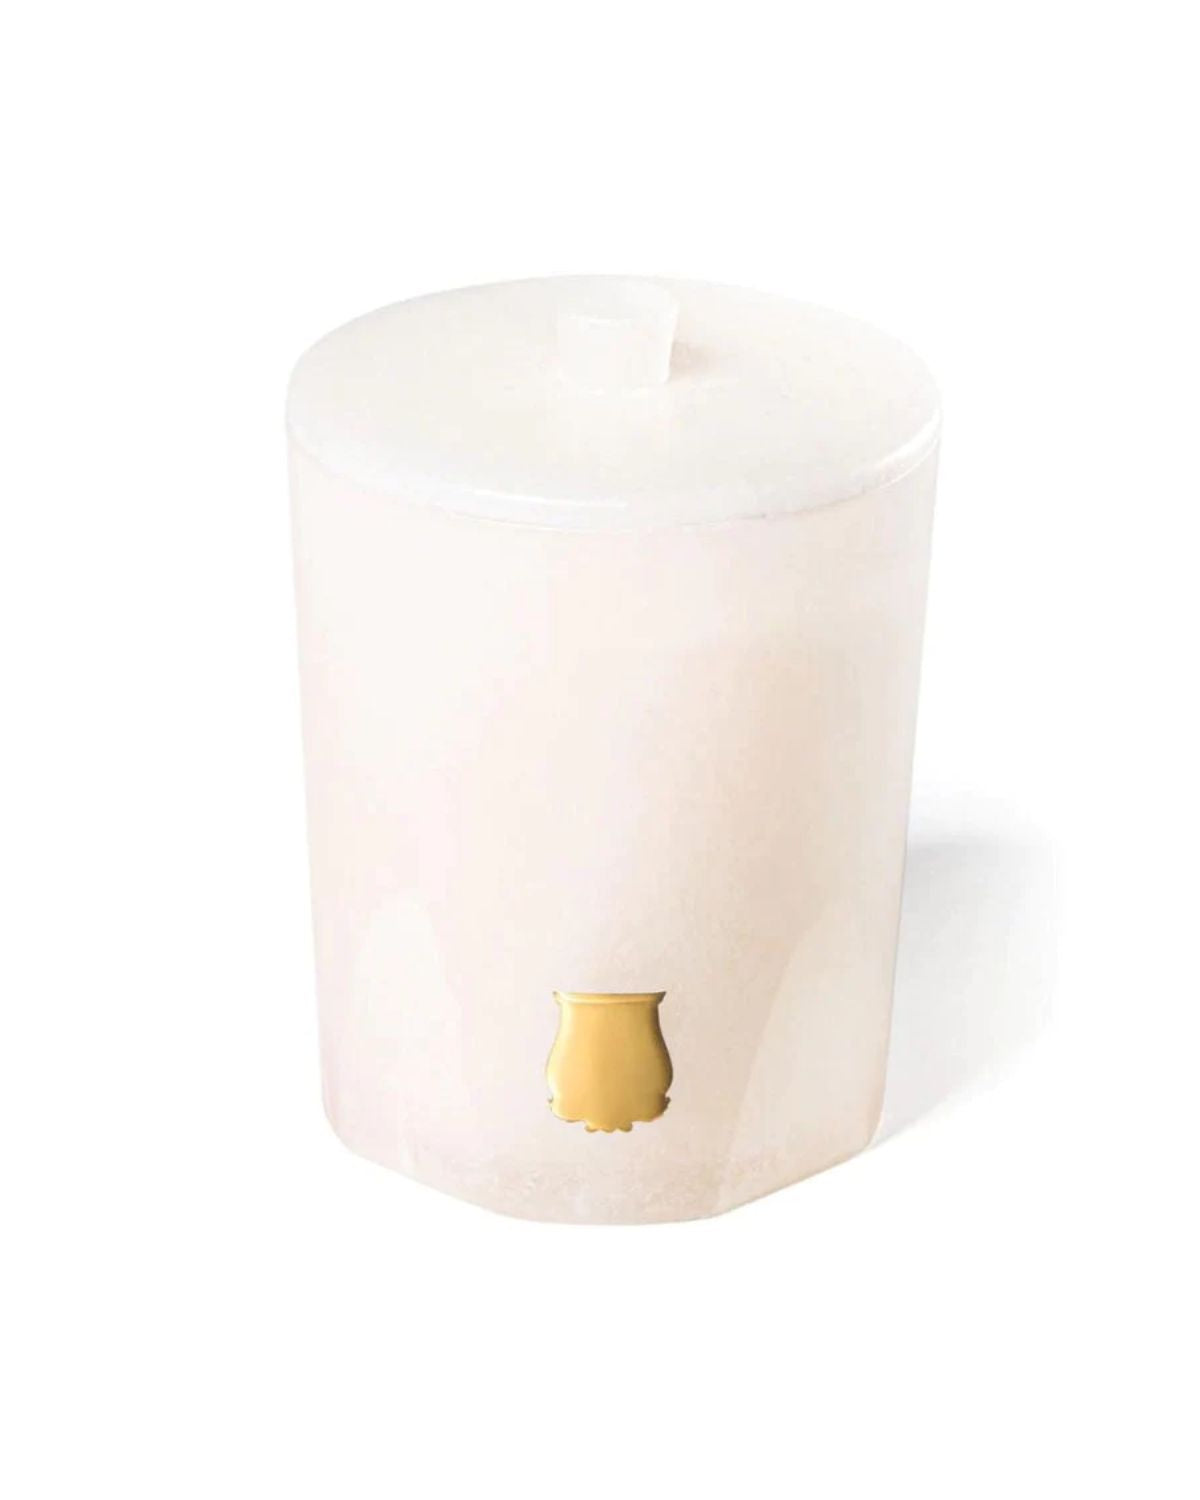 Trudon Alabaster Candle with Lid 270g – The Beauty Shop